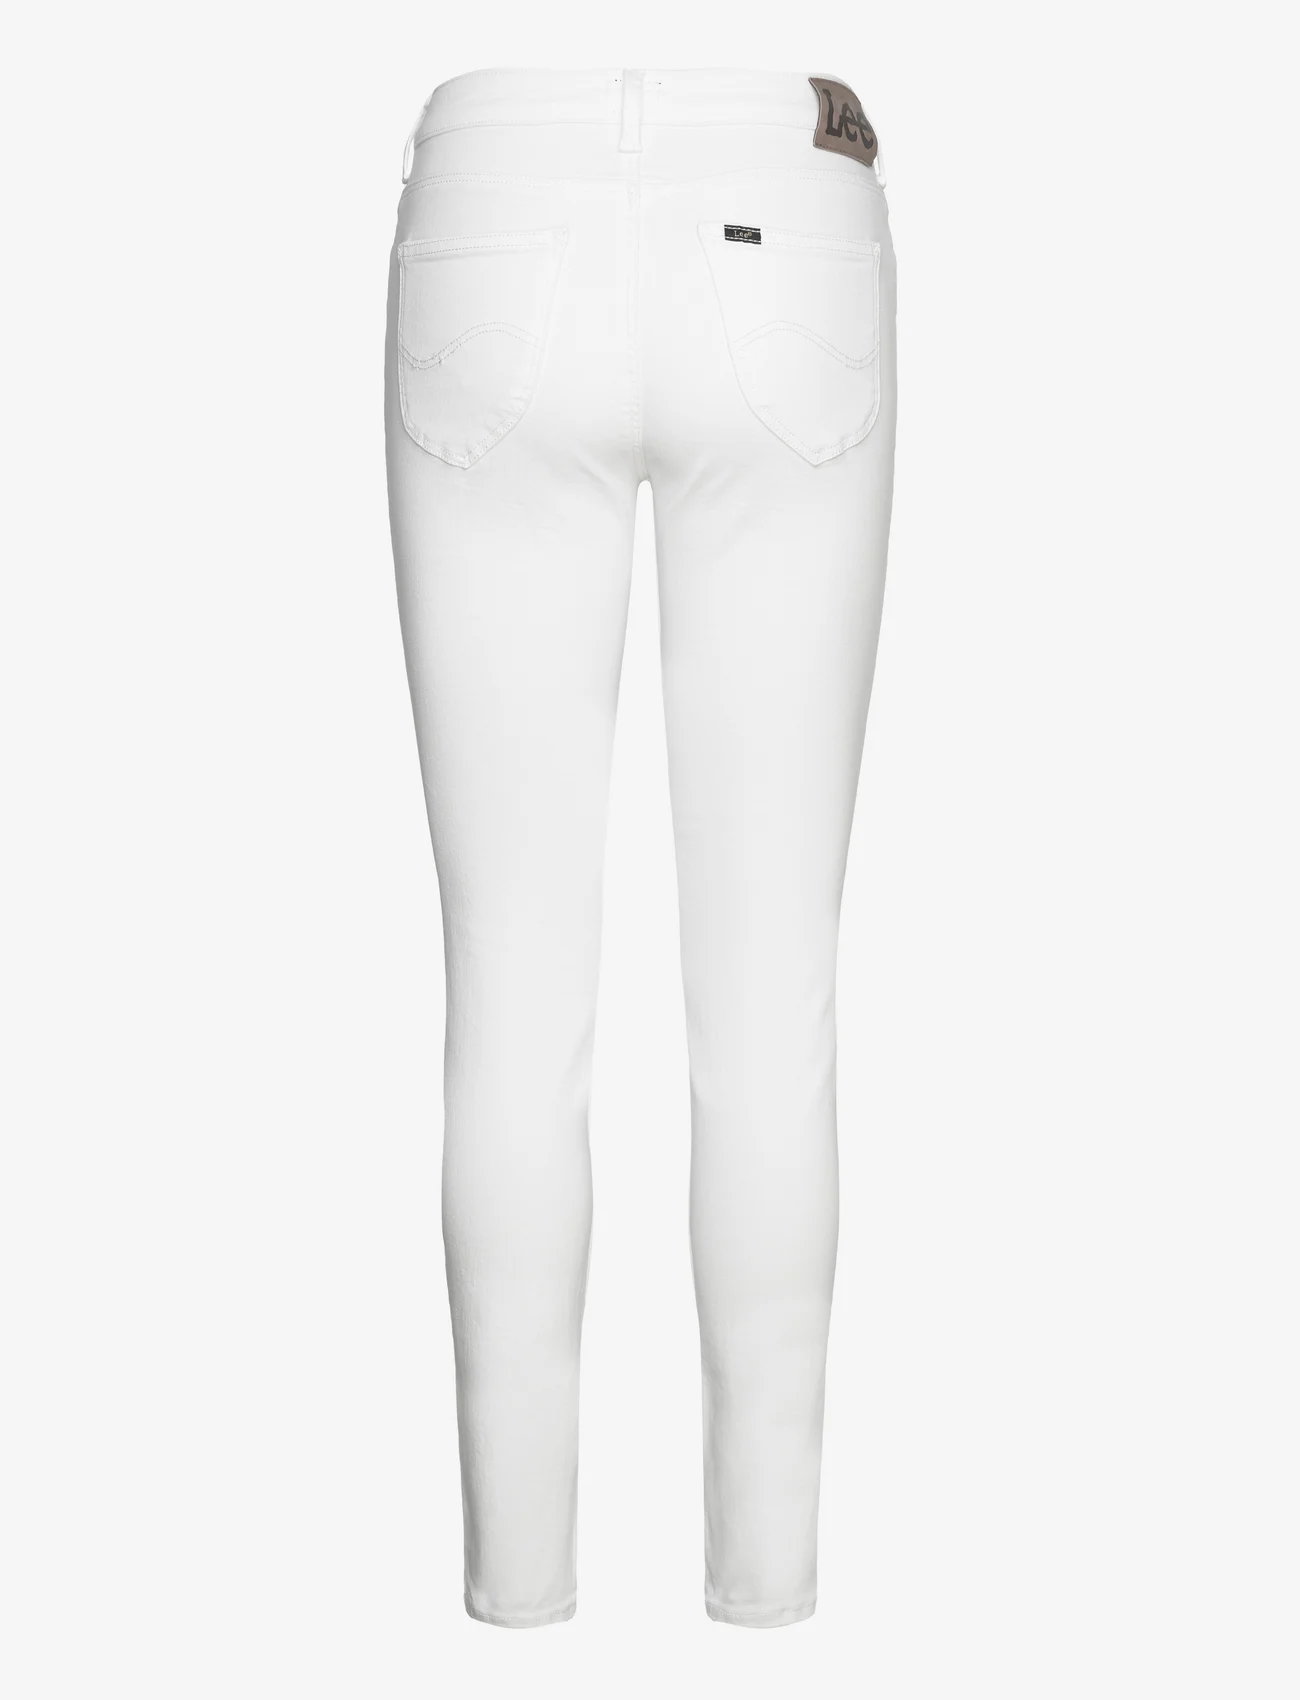 Lee Jeans - FOREVERFIT - dżinsy skinny fit - bright white - 1